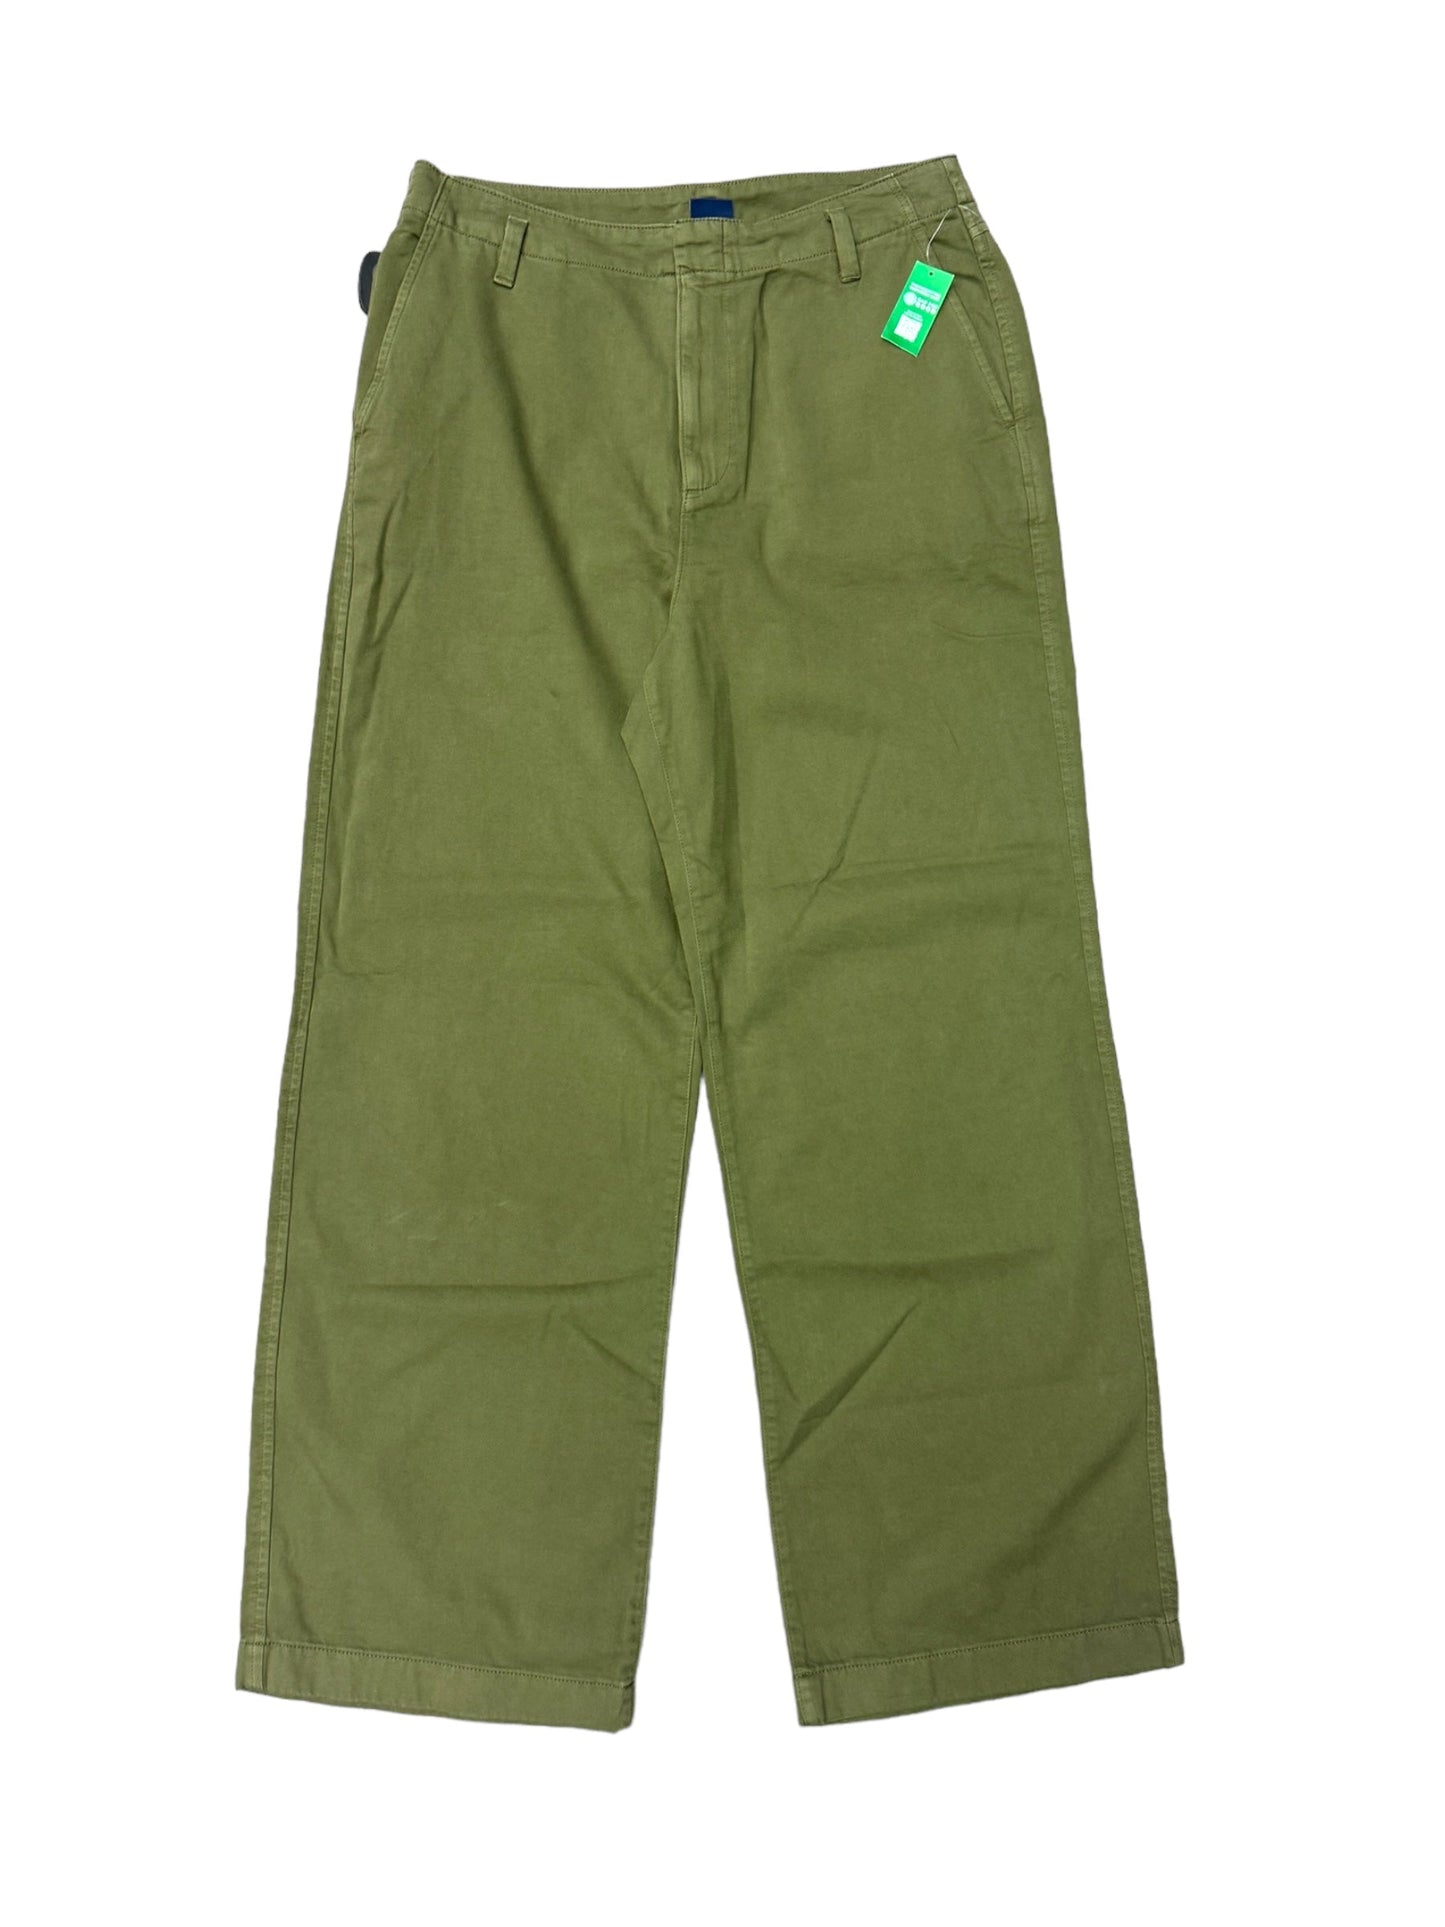 Green Pants Other Gap, Size 8